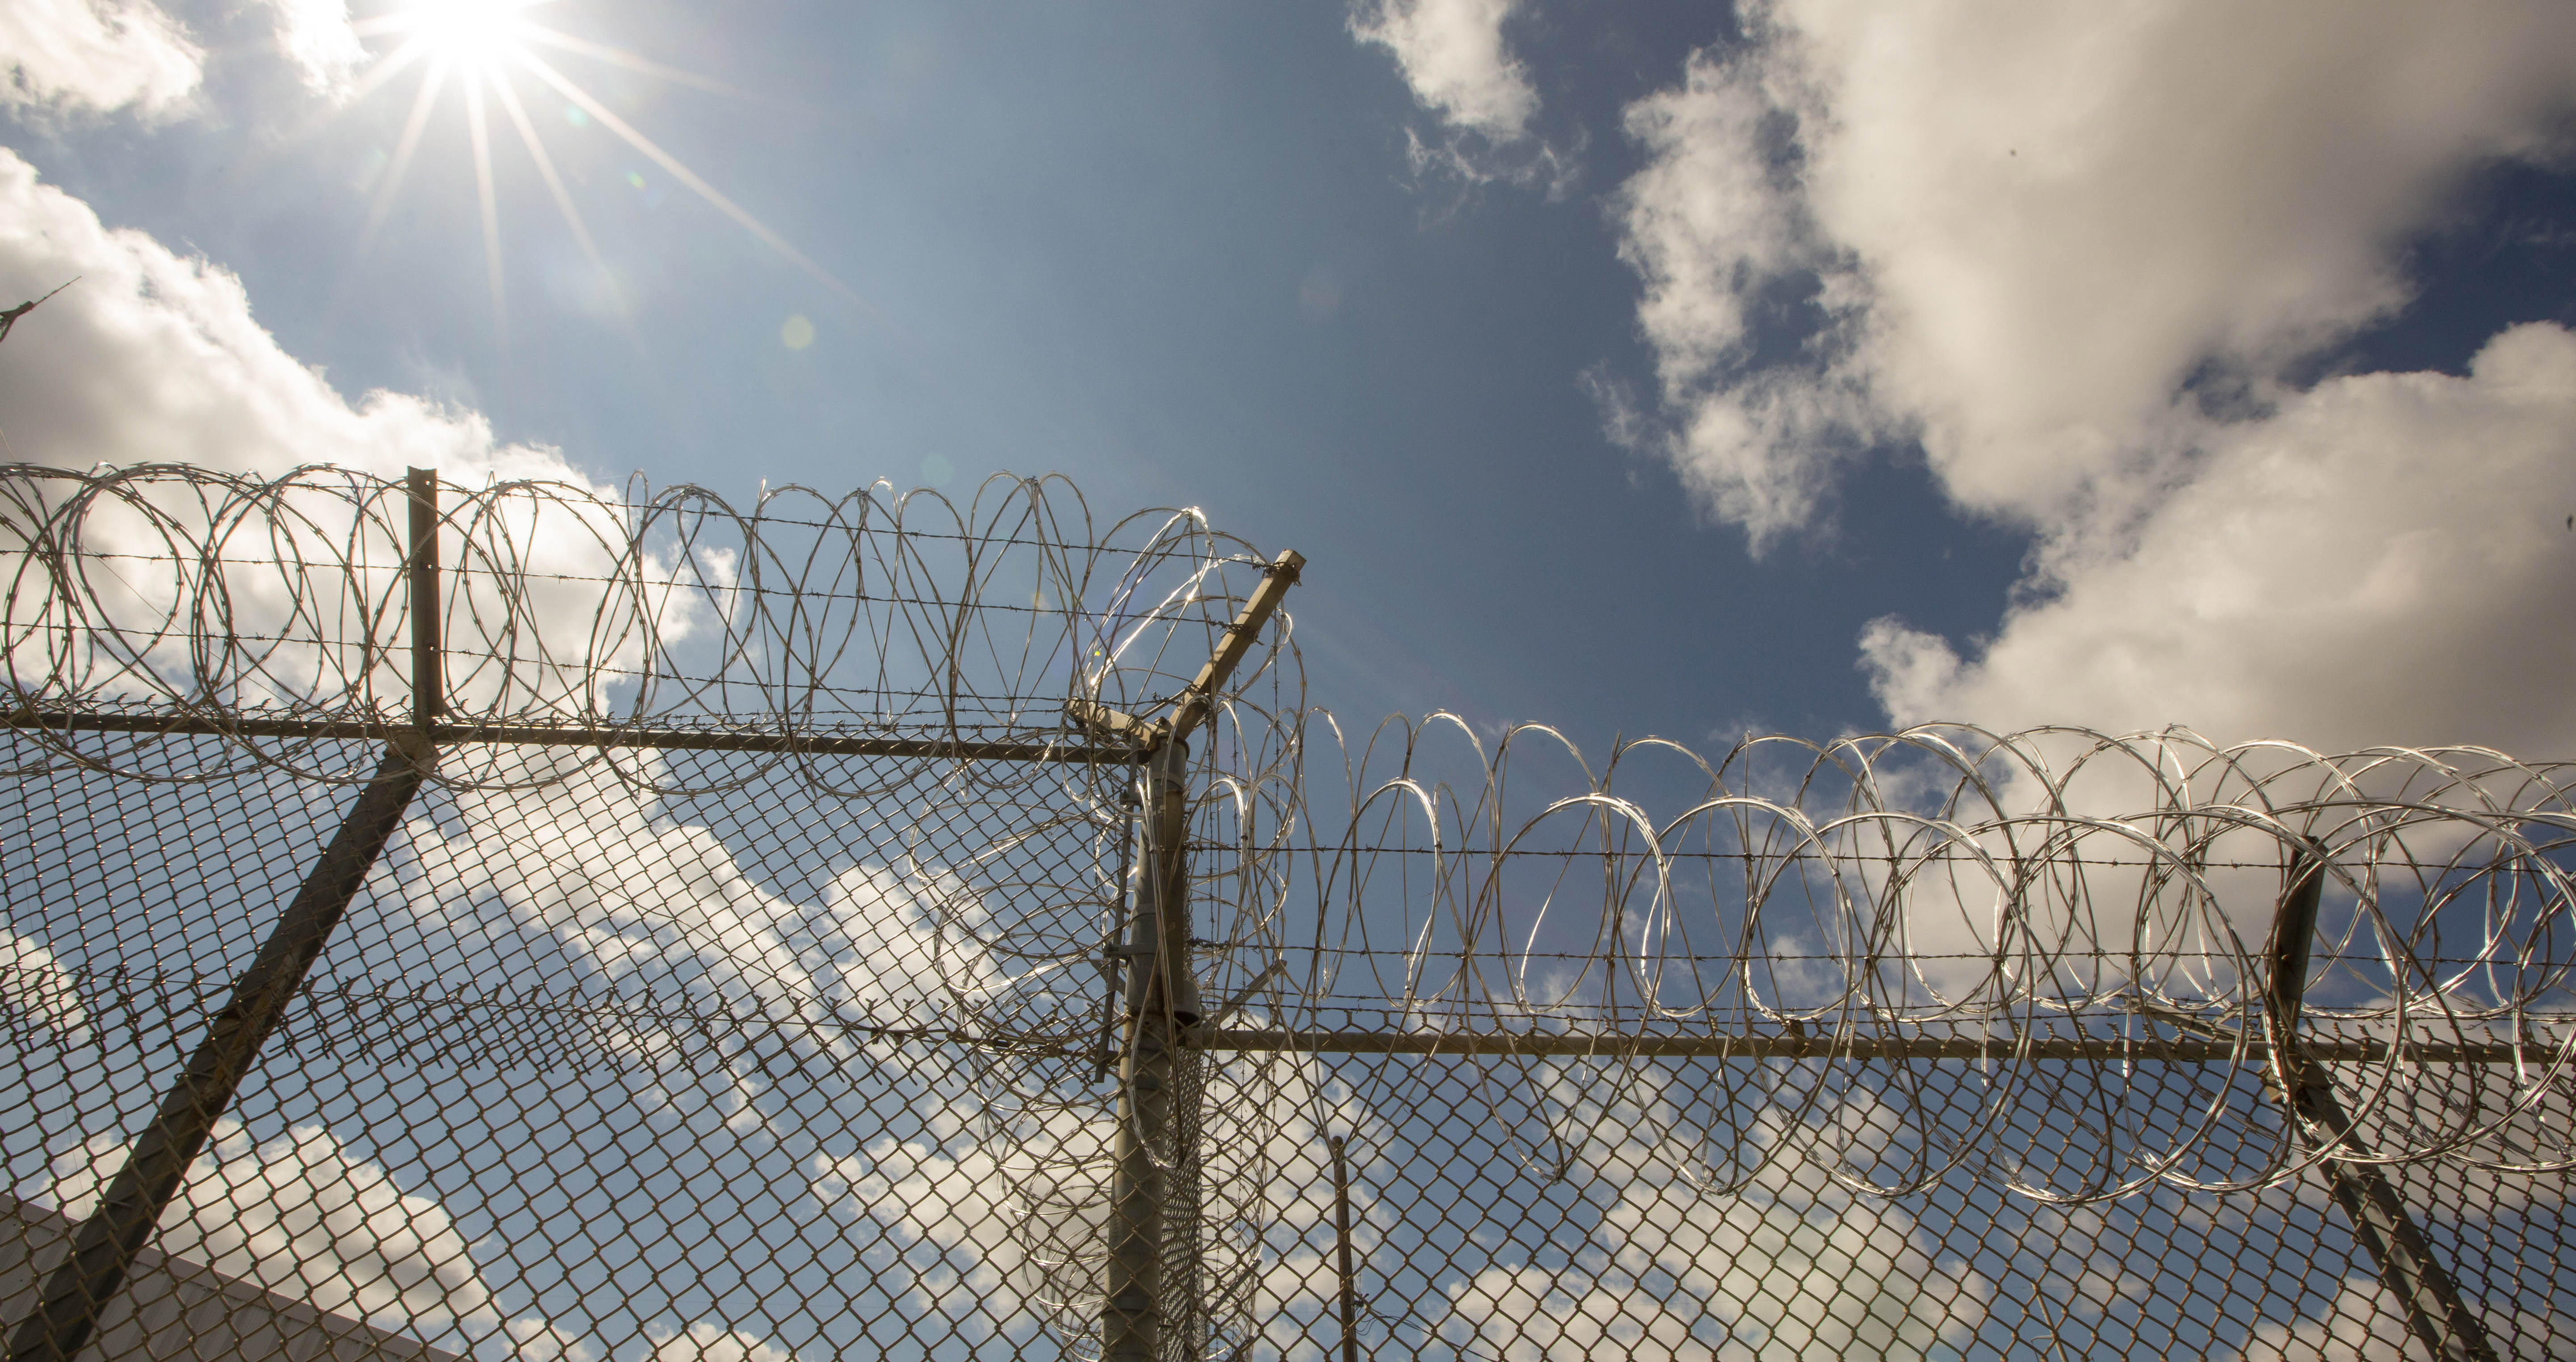 Barbed wire on top of a prison fence with a background of a blue sky and sunshine